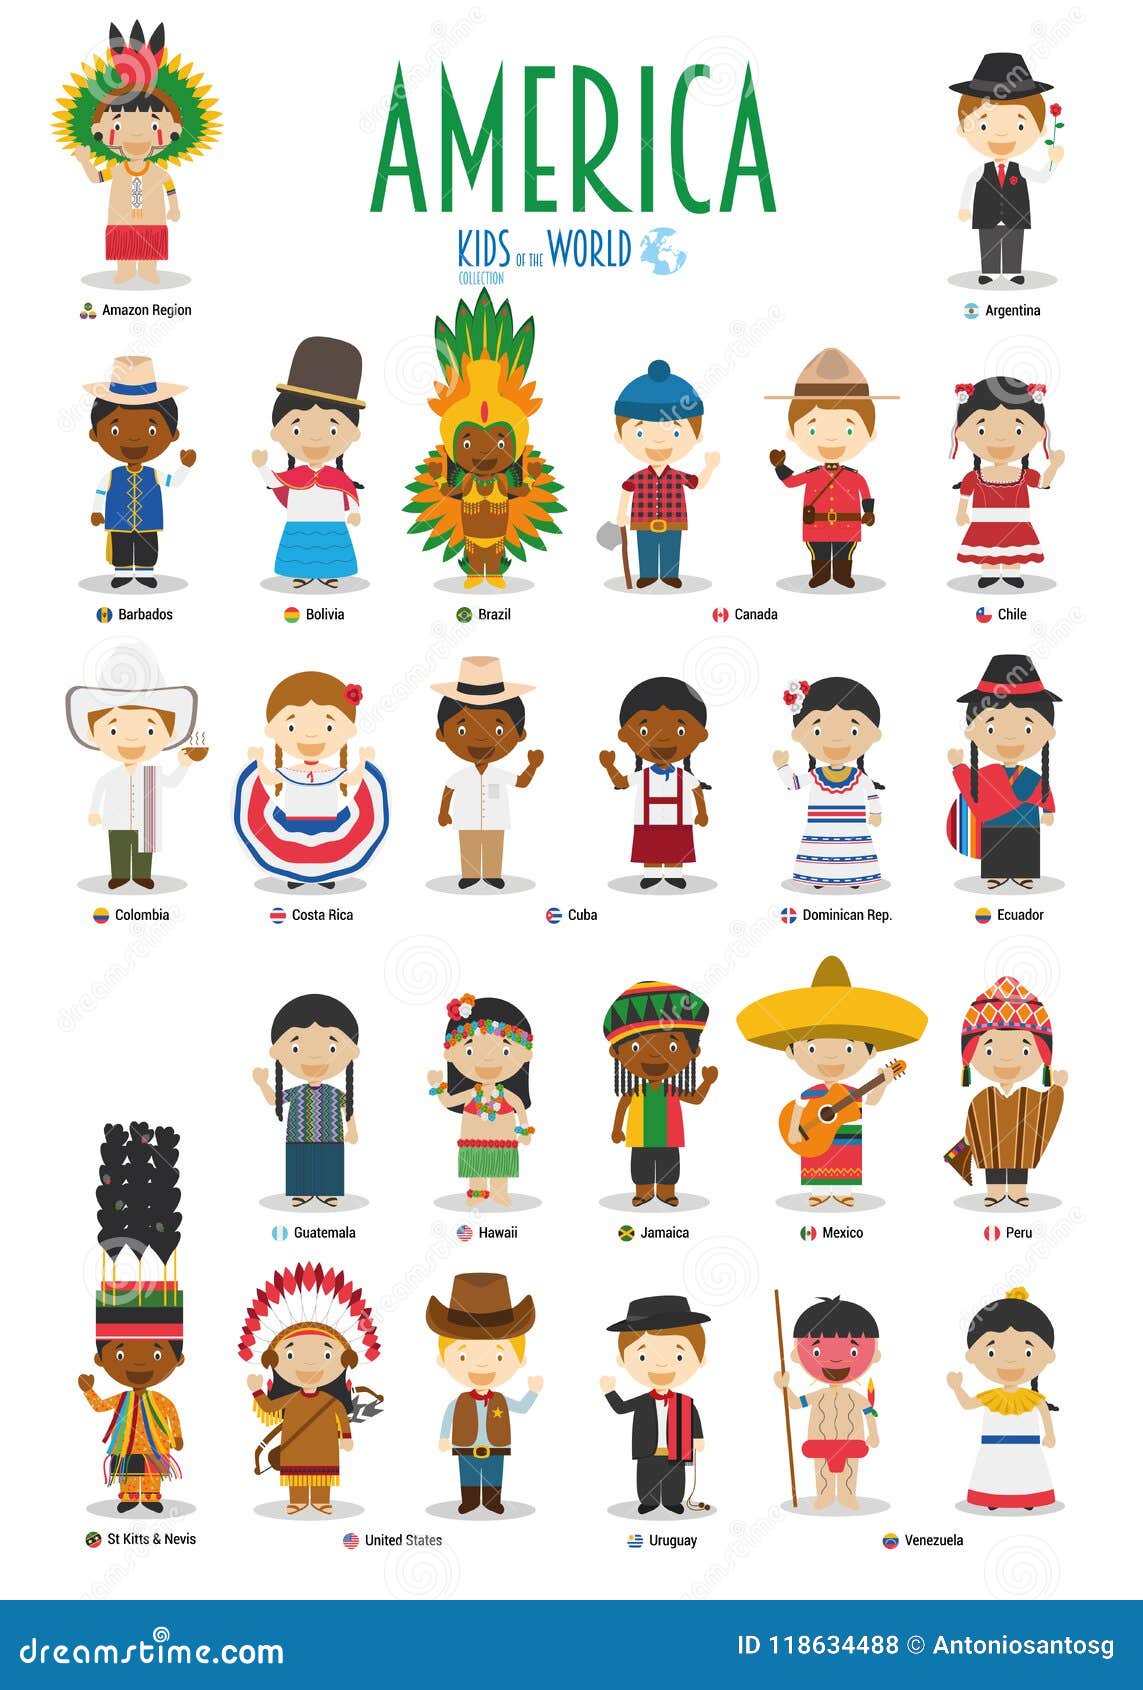 kids and nationalities of the world : america.